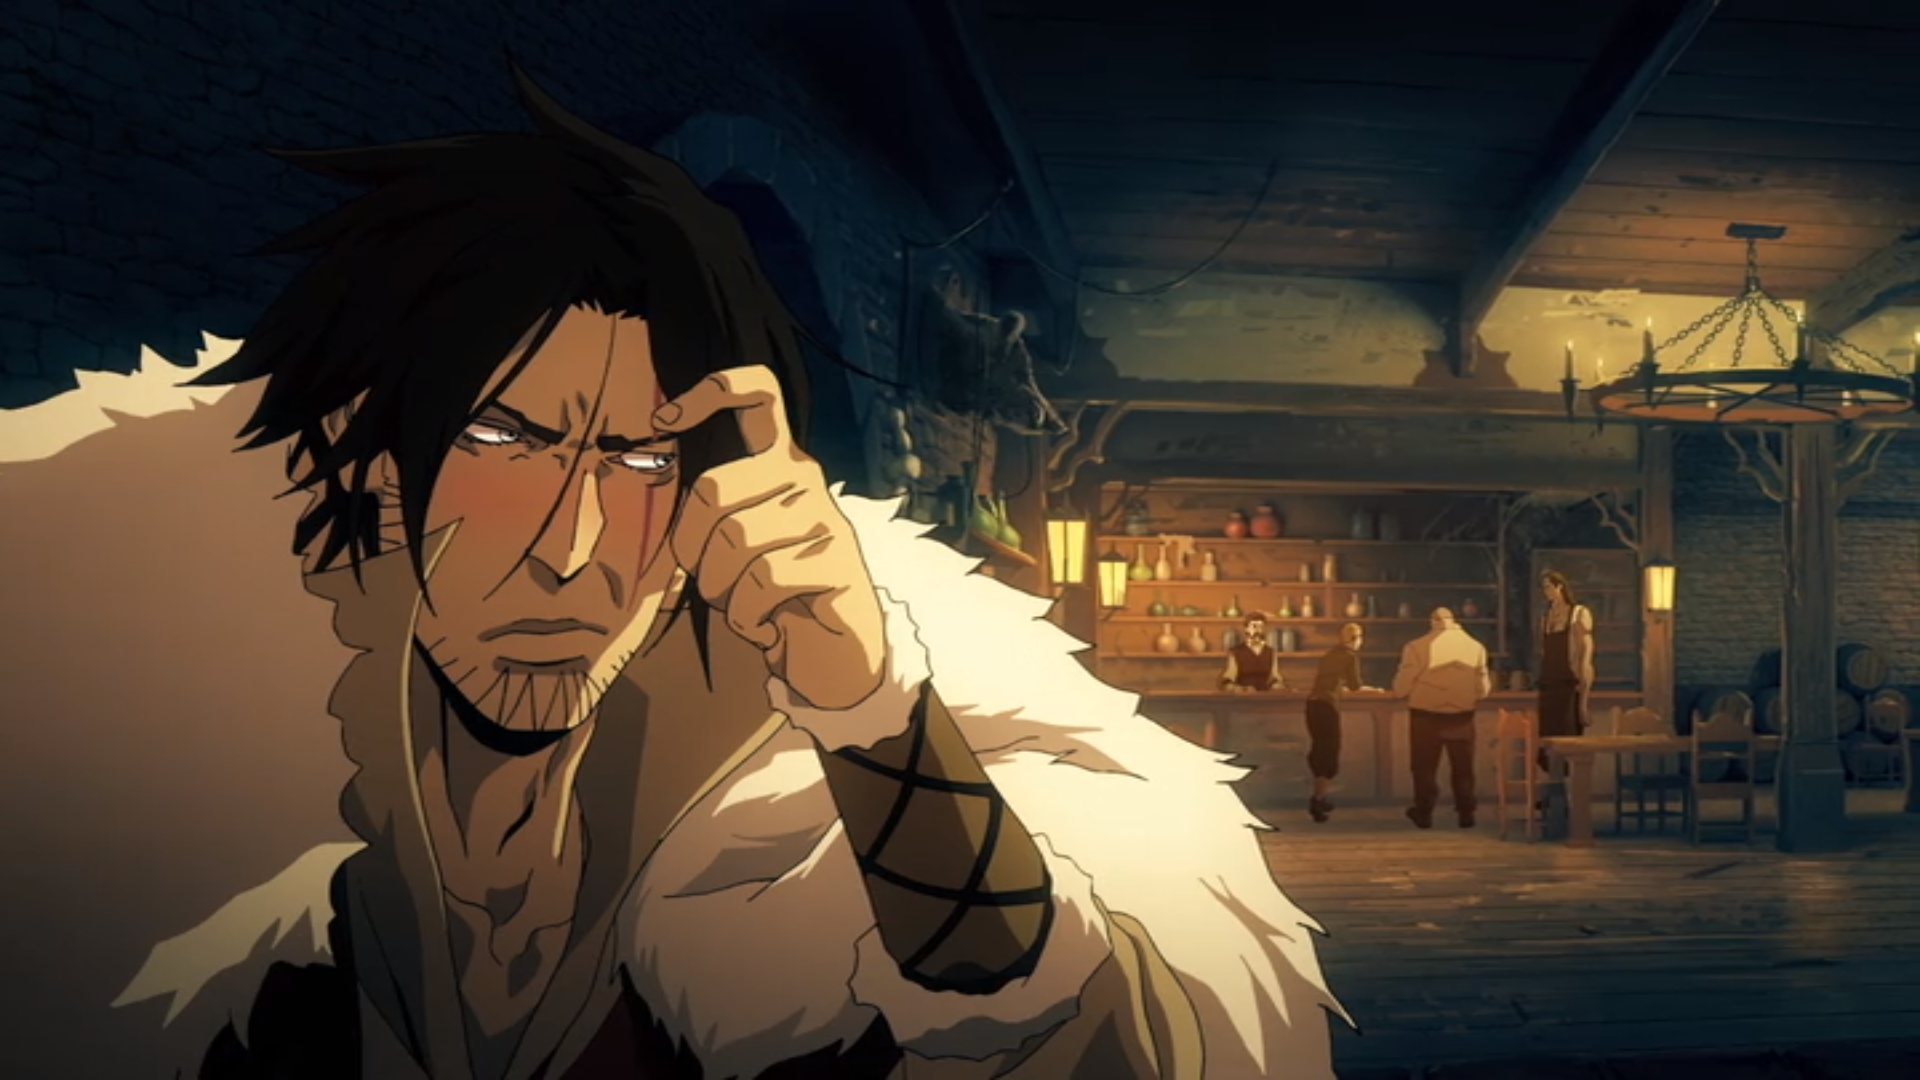 Castlevania anime Trevor Belmont drunk – All About Anime and Manga